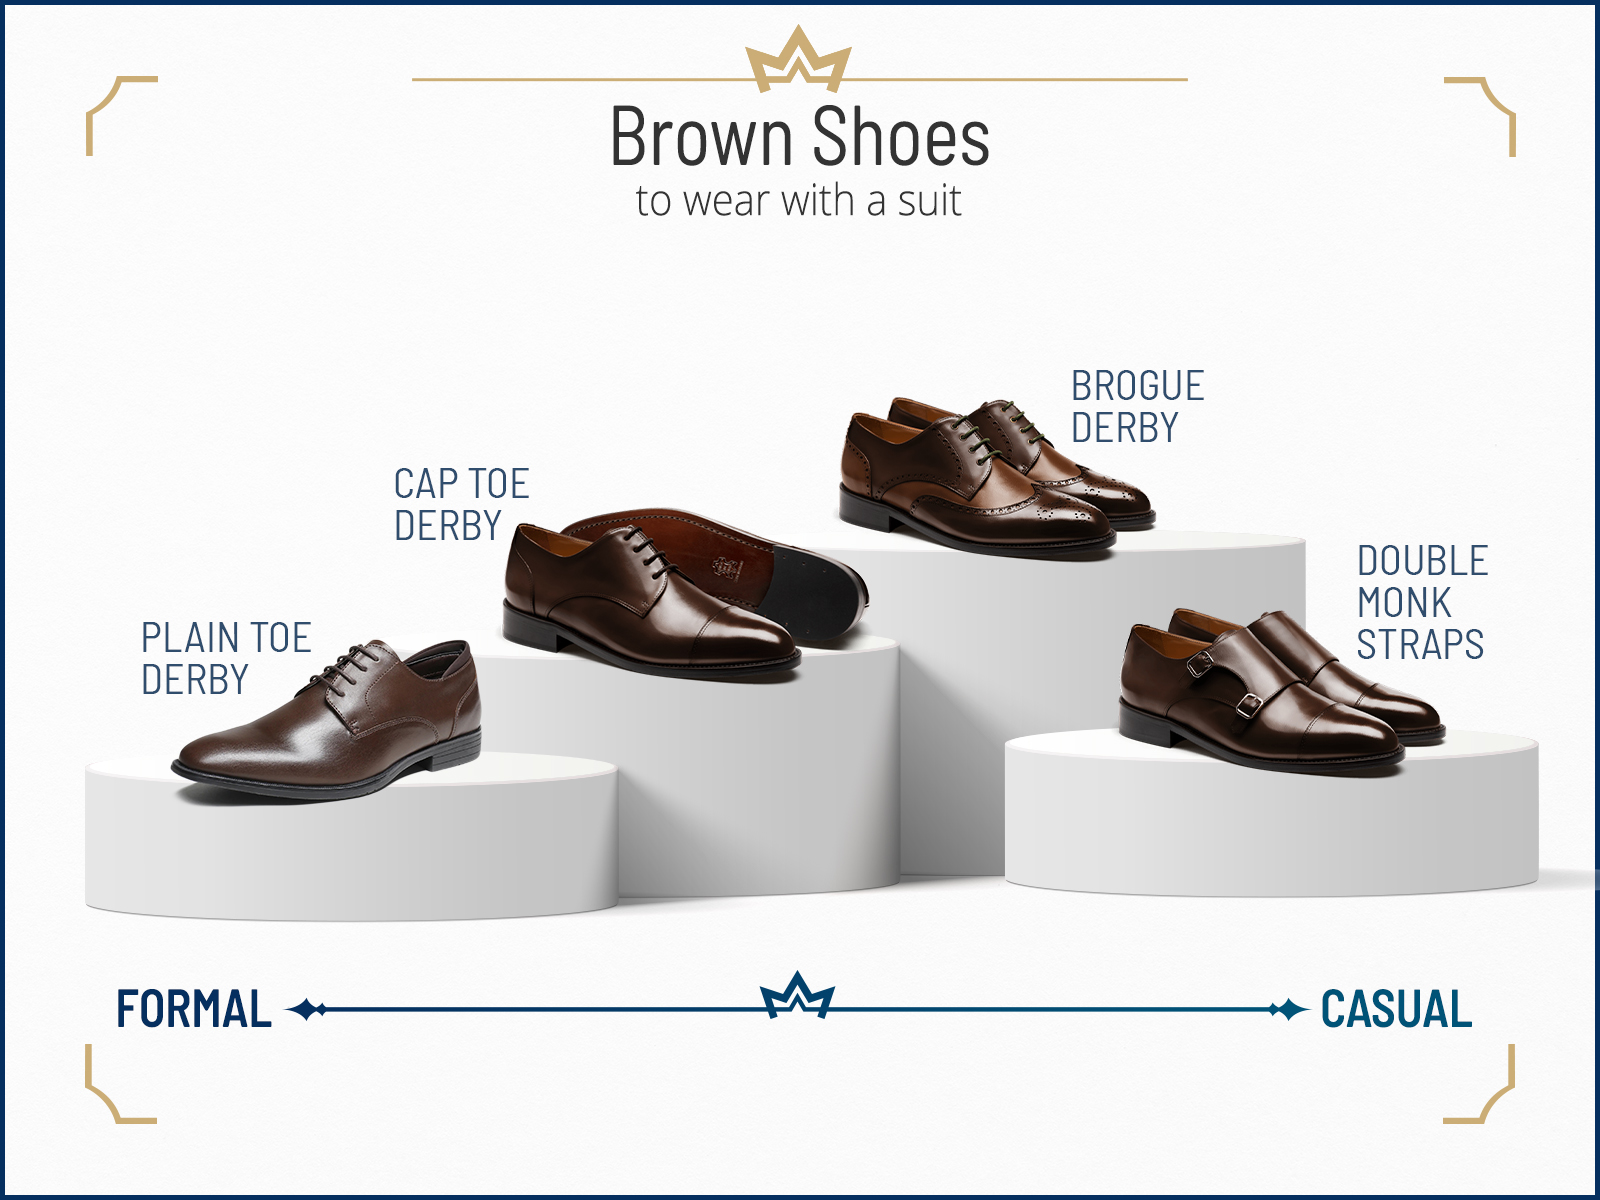 Brown dress shoe types to wear with suit pants